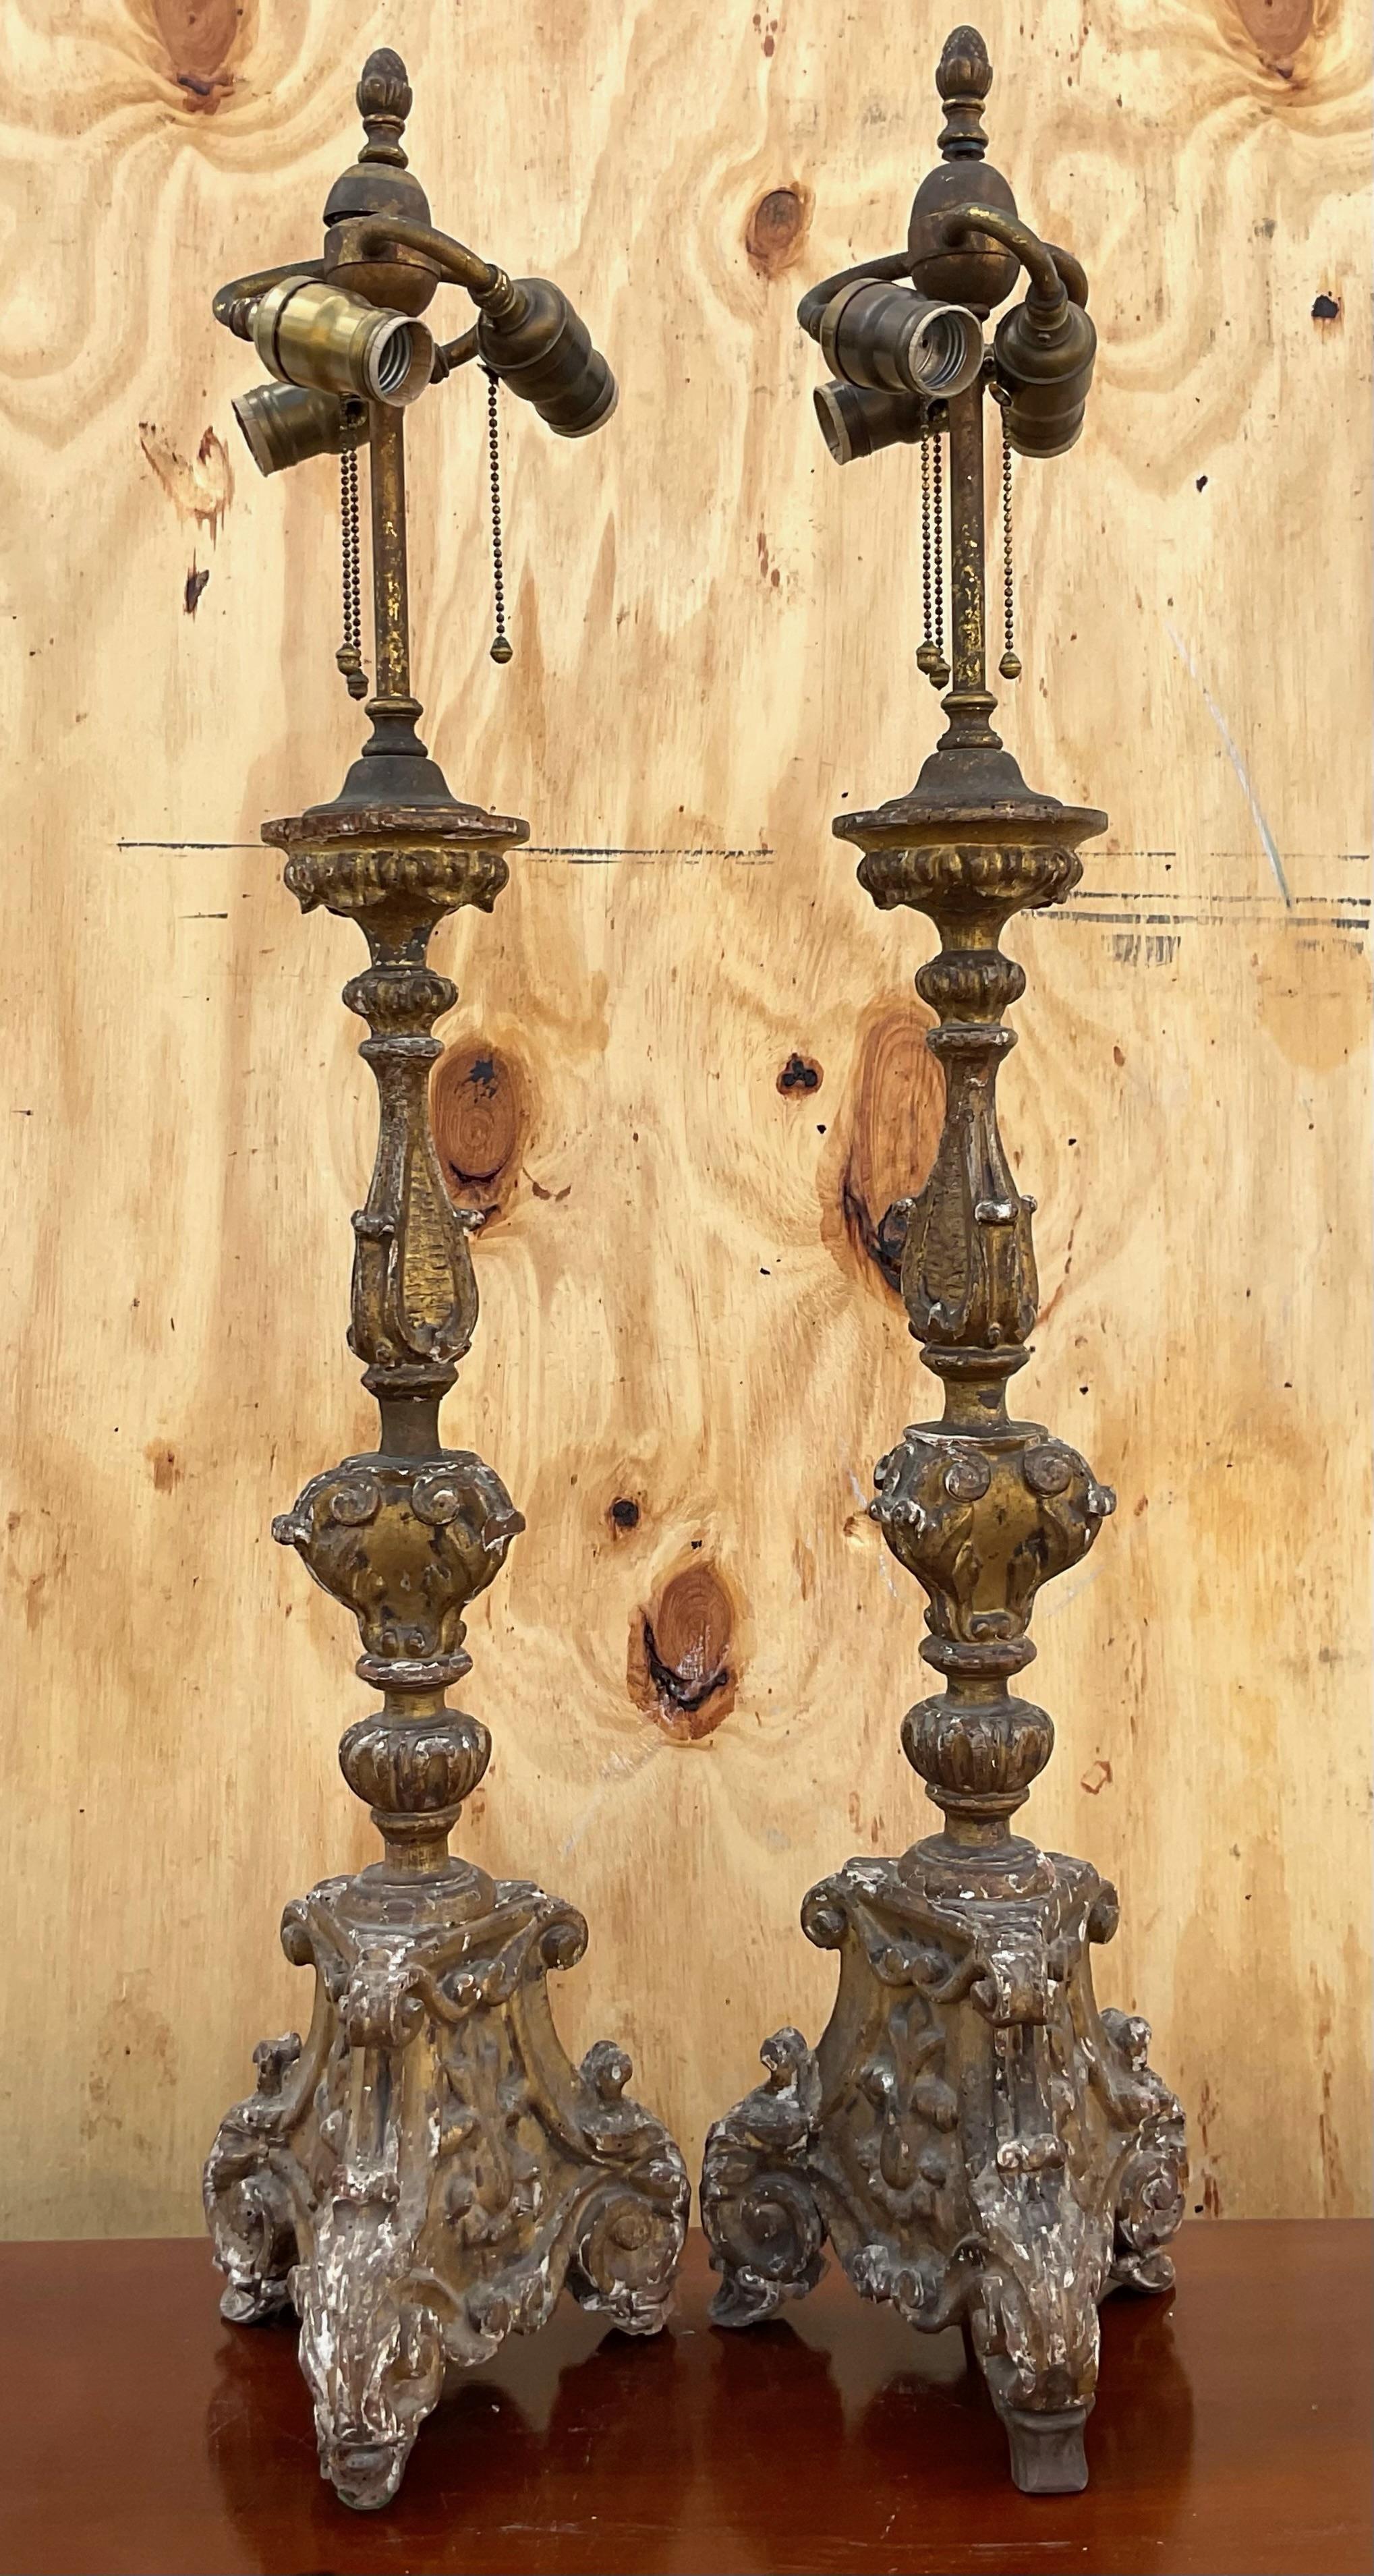 Spectacular vintage pair of carved gilt table lamps. These incredible lamps have three bulbs all operated with their own pull string. Their intricate detailing matched with their scale make them the perfect statement piece you have been searching